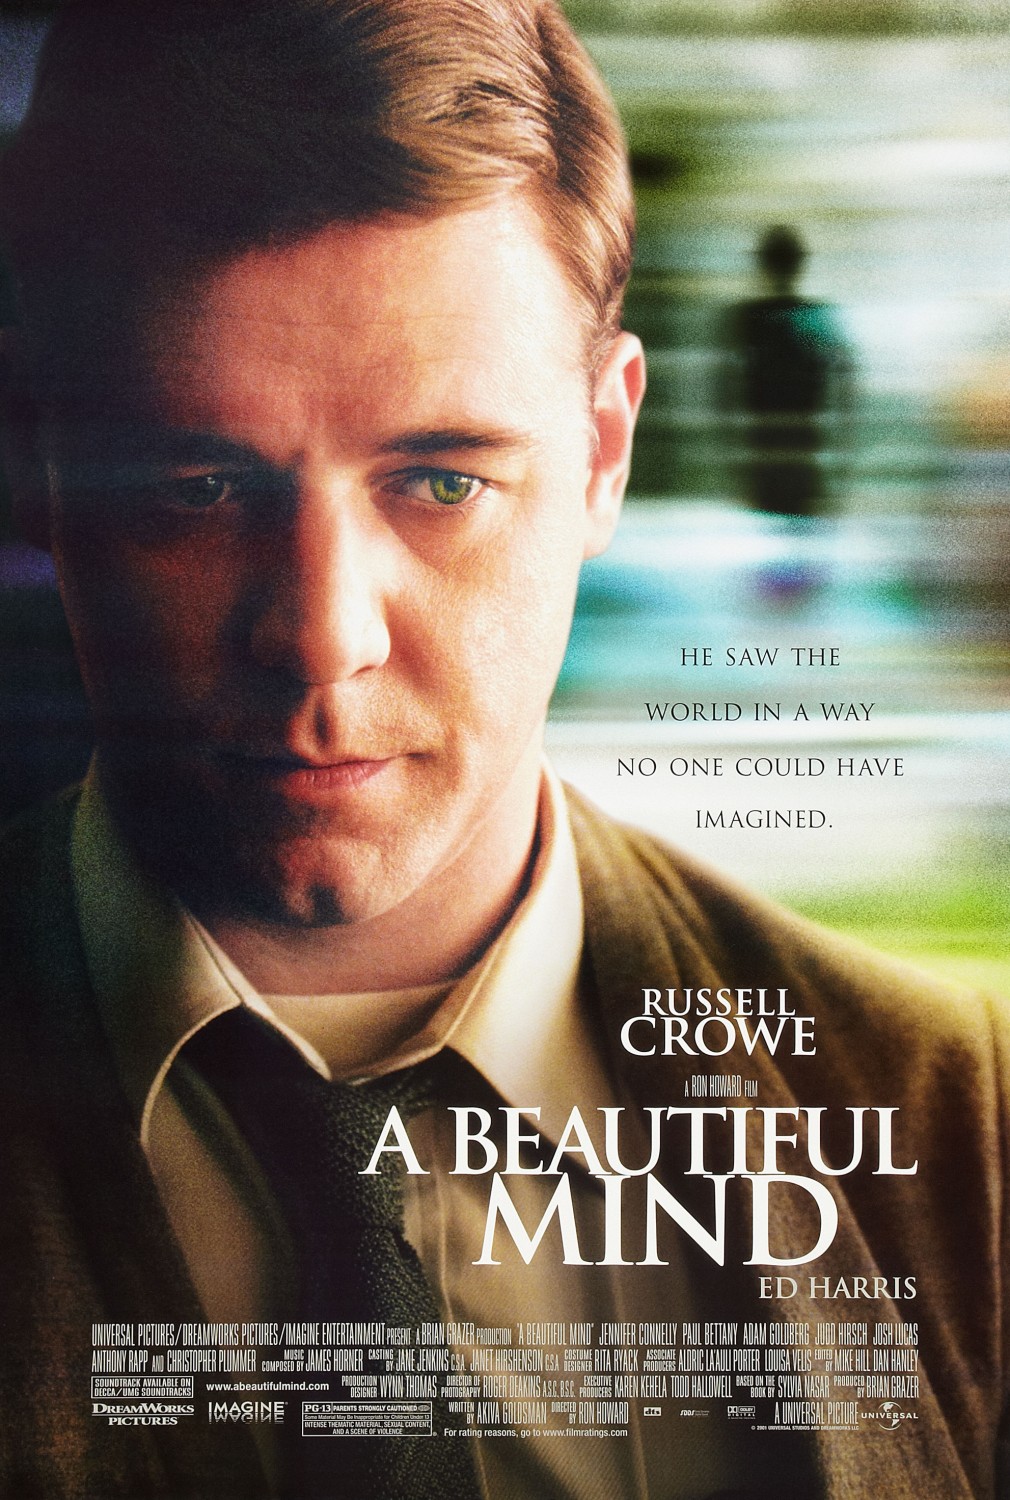 A Beautiful Mind (2001) Russell Crowe